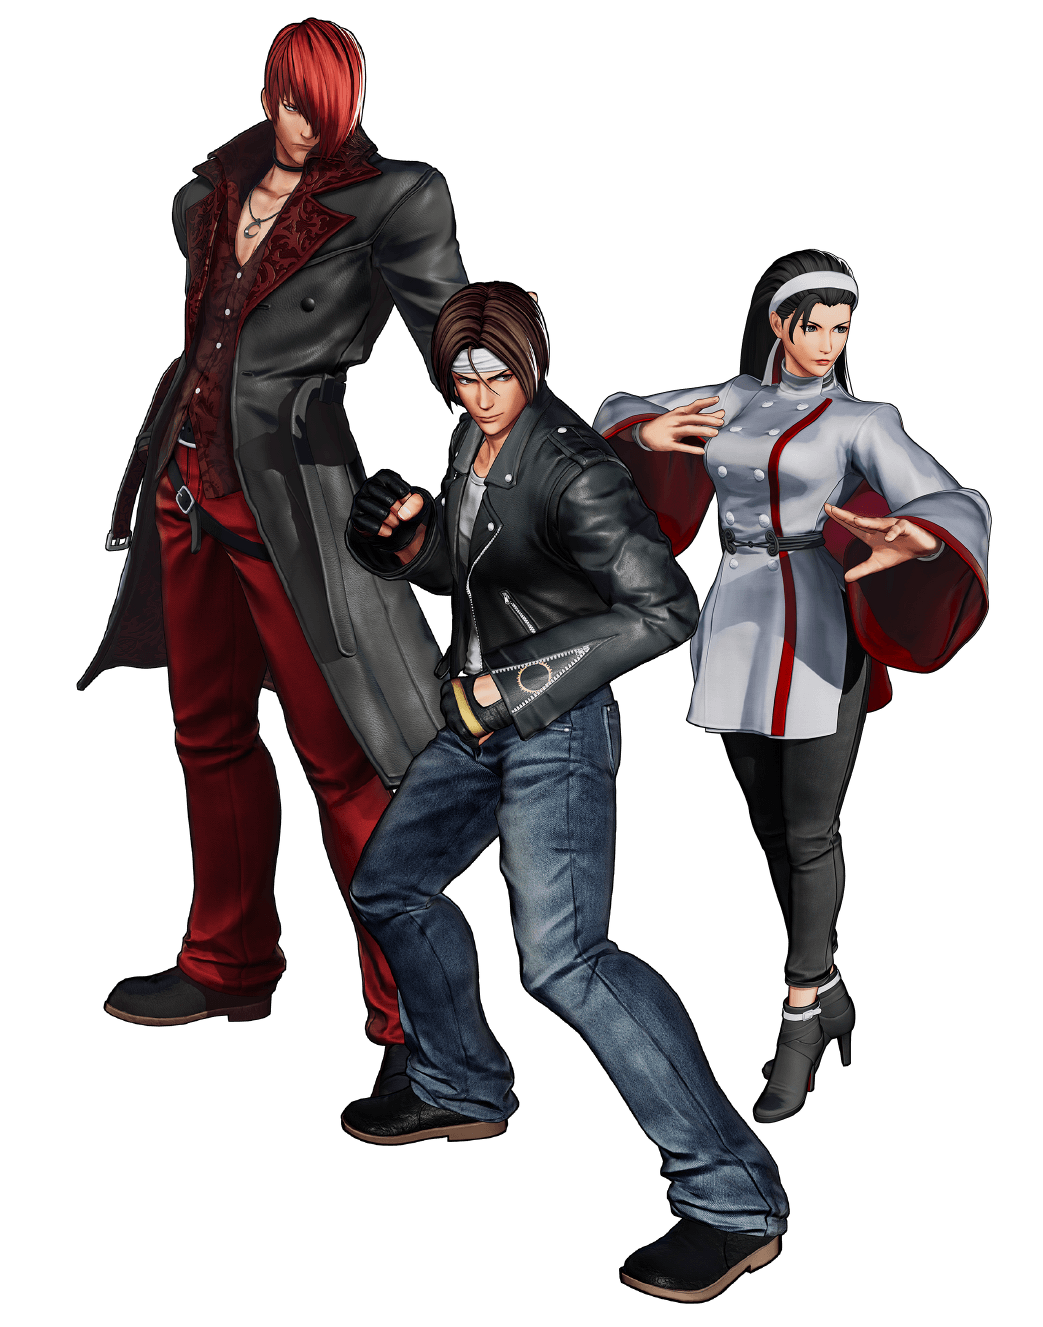 Kyo & Iori Team from The King of Fighters XI